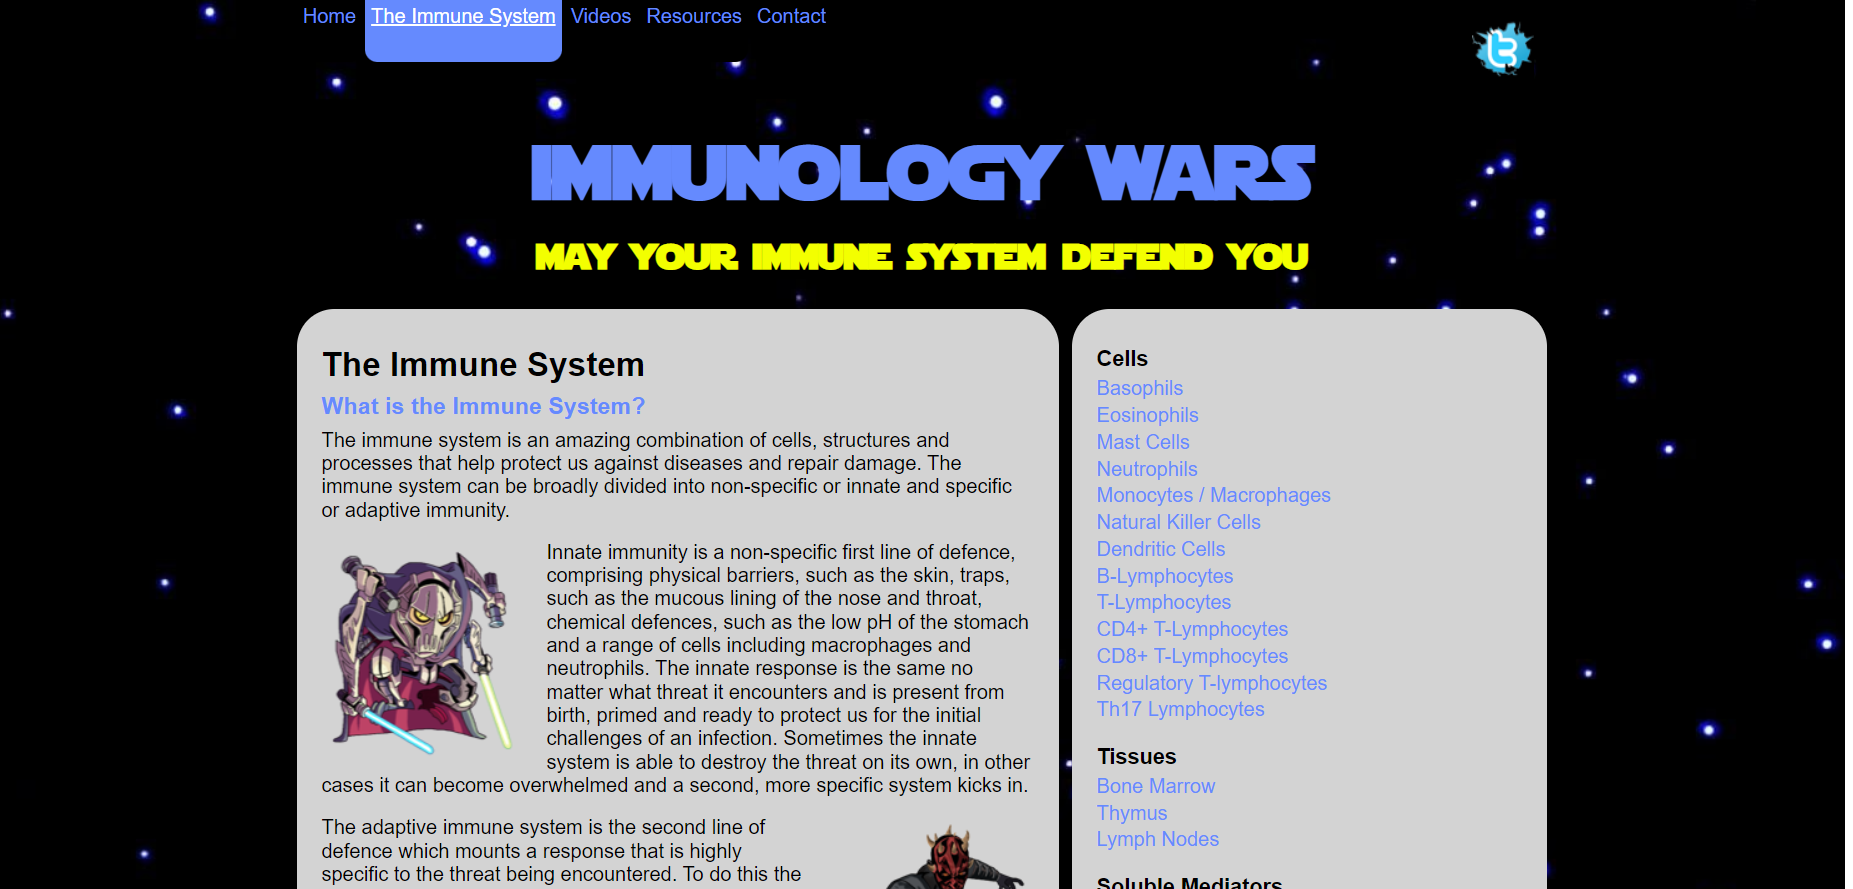 Immunology Wars - the immune system in a Star Wars theme.